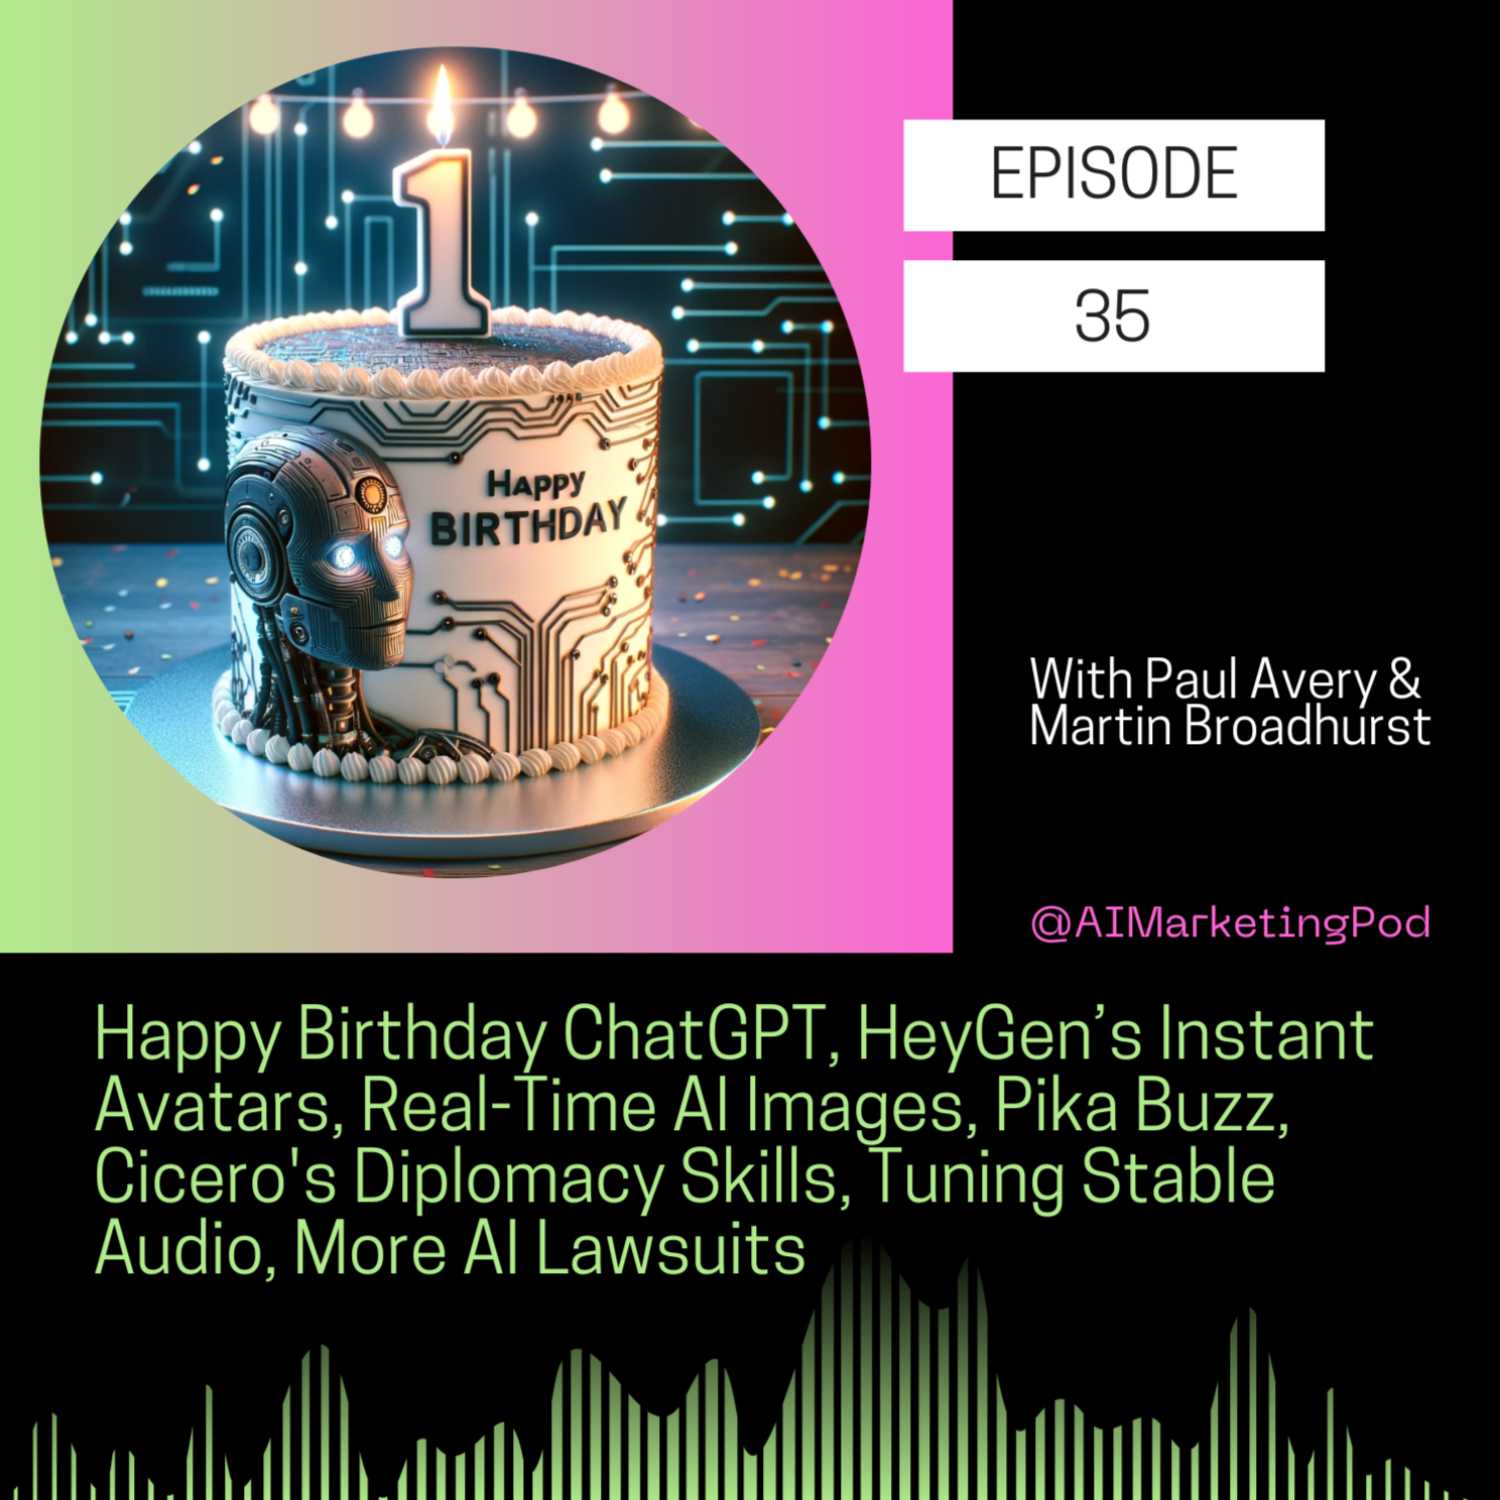 Happy 1st Birthday ChatGPT, HeyGen’s Instant Video Avatars, Real-Time AI Images, Pika Buzz, Cicero's Diplomacy Skills, Tuning Stable Audio, and More AI Lawsuits